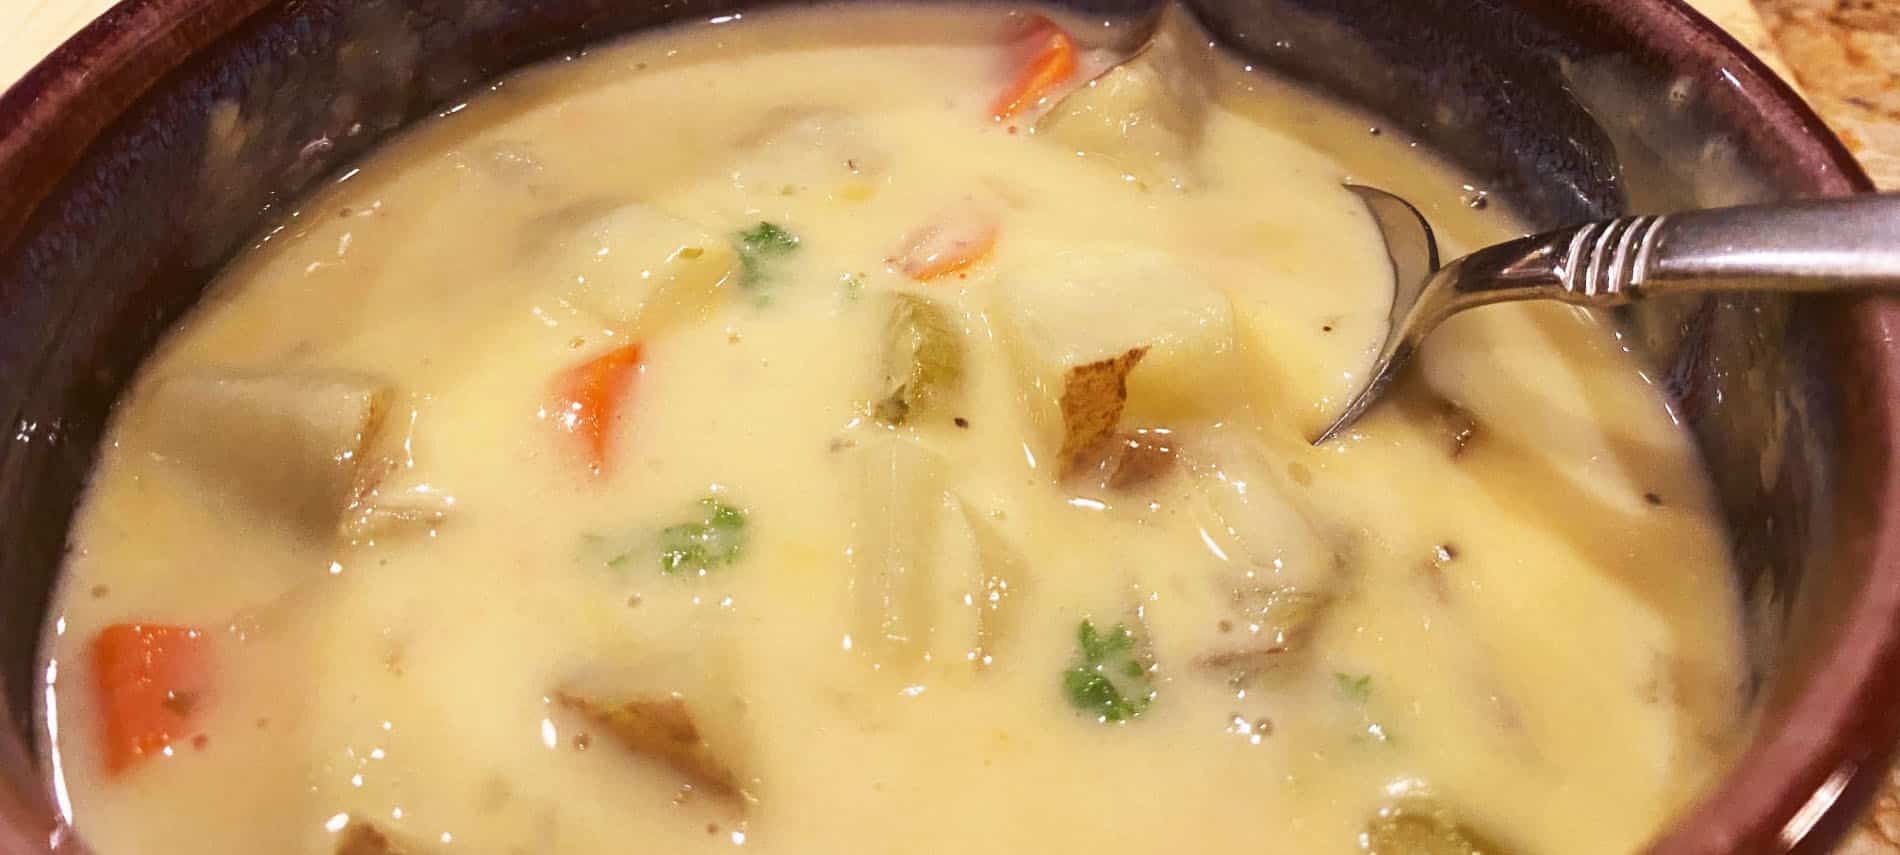 Golden cheesy soup with chunks of potatoes, carrots, onions and celery